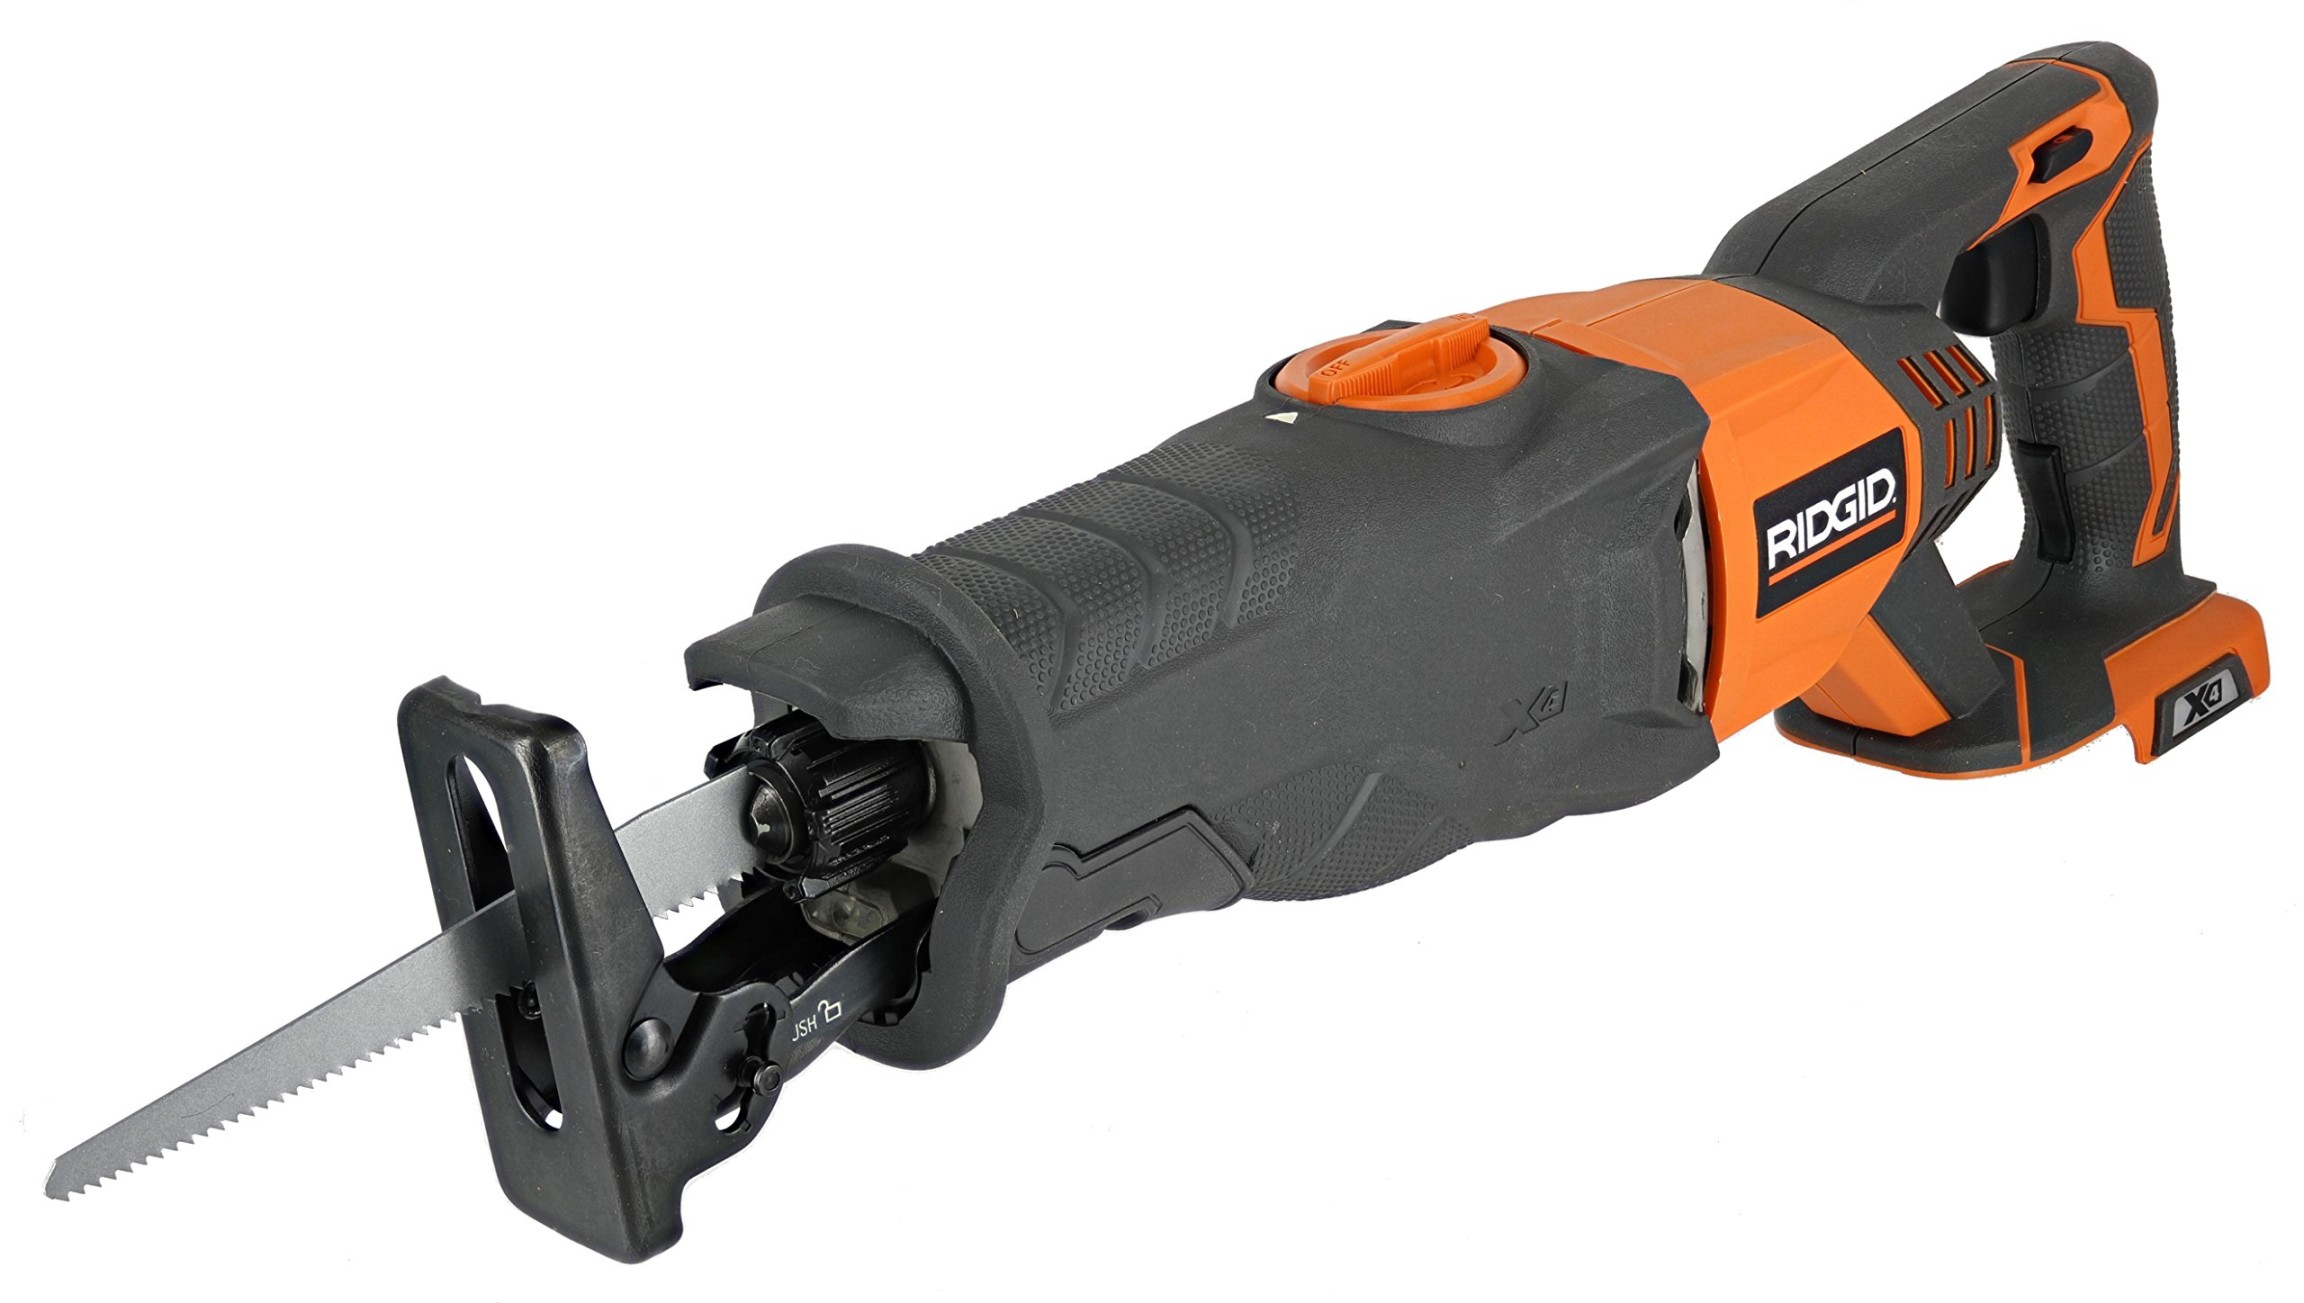 ridgid-rb-x-volt-cordless-reciprocating-saw-w-orbital-action-battery-not-included-power-tool-only Ridgid Sawzall Review picture